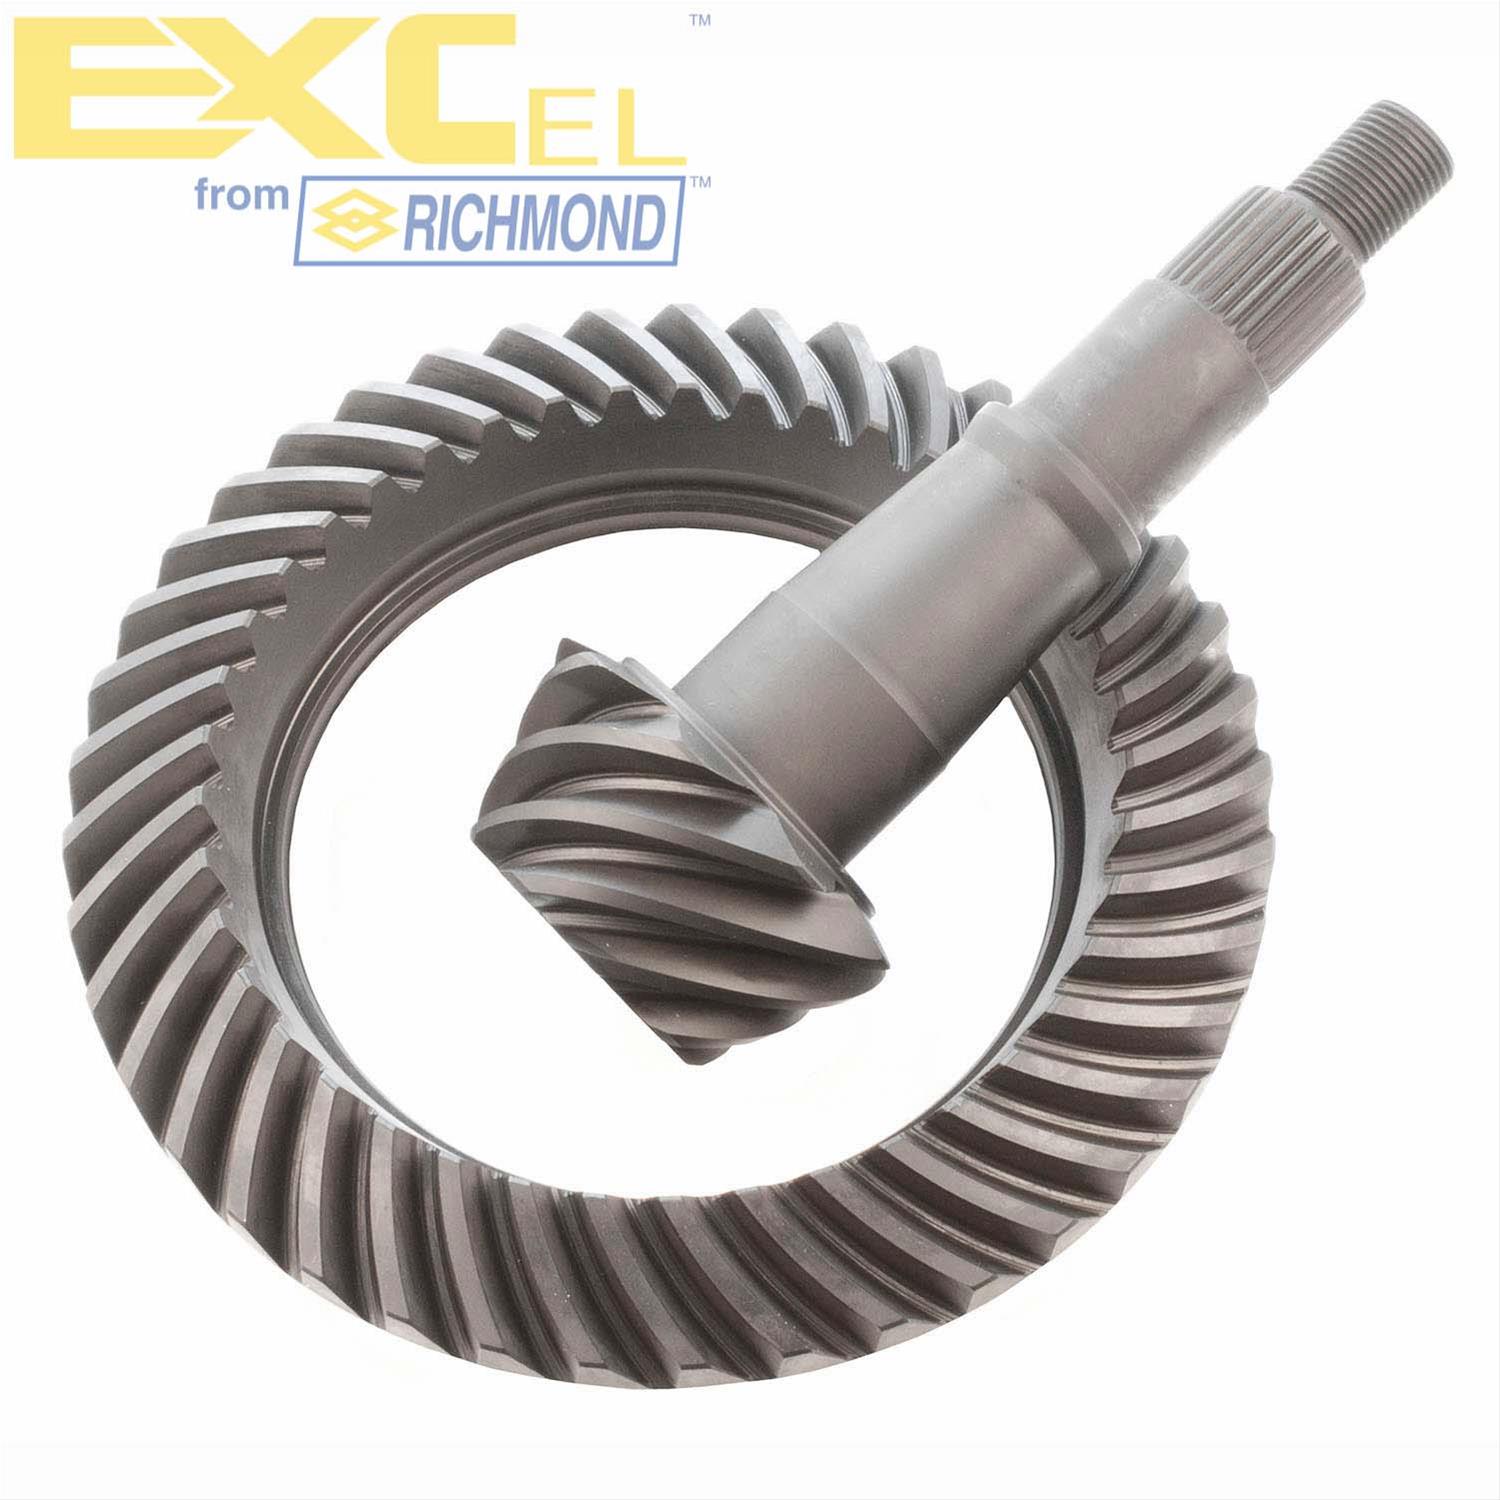 Excel Ring Pinion And Axle Gm925410 Richmond Gear Excel Ring And Pinion